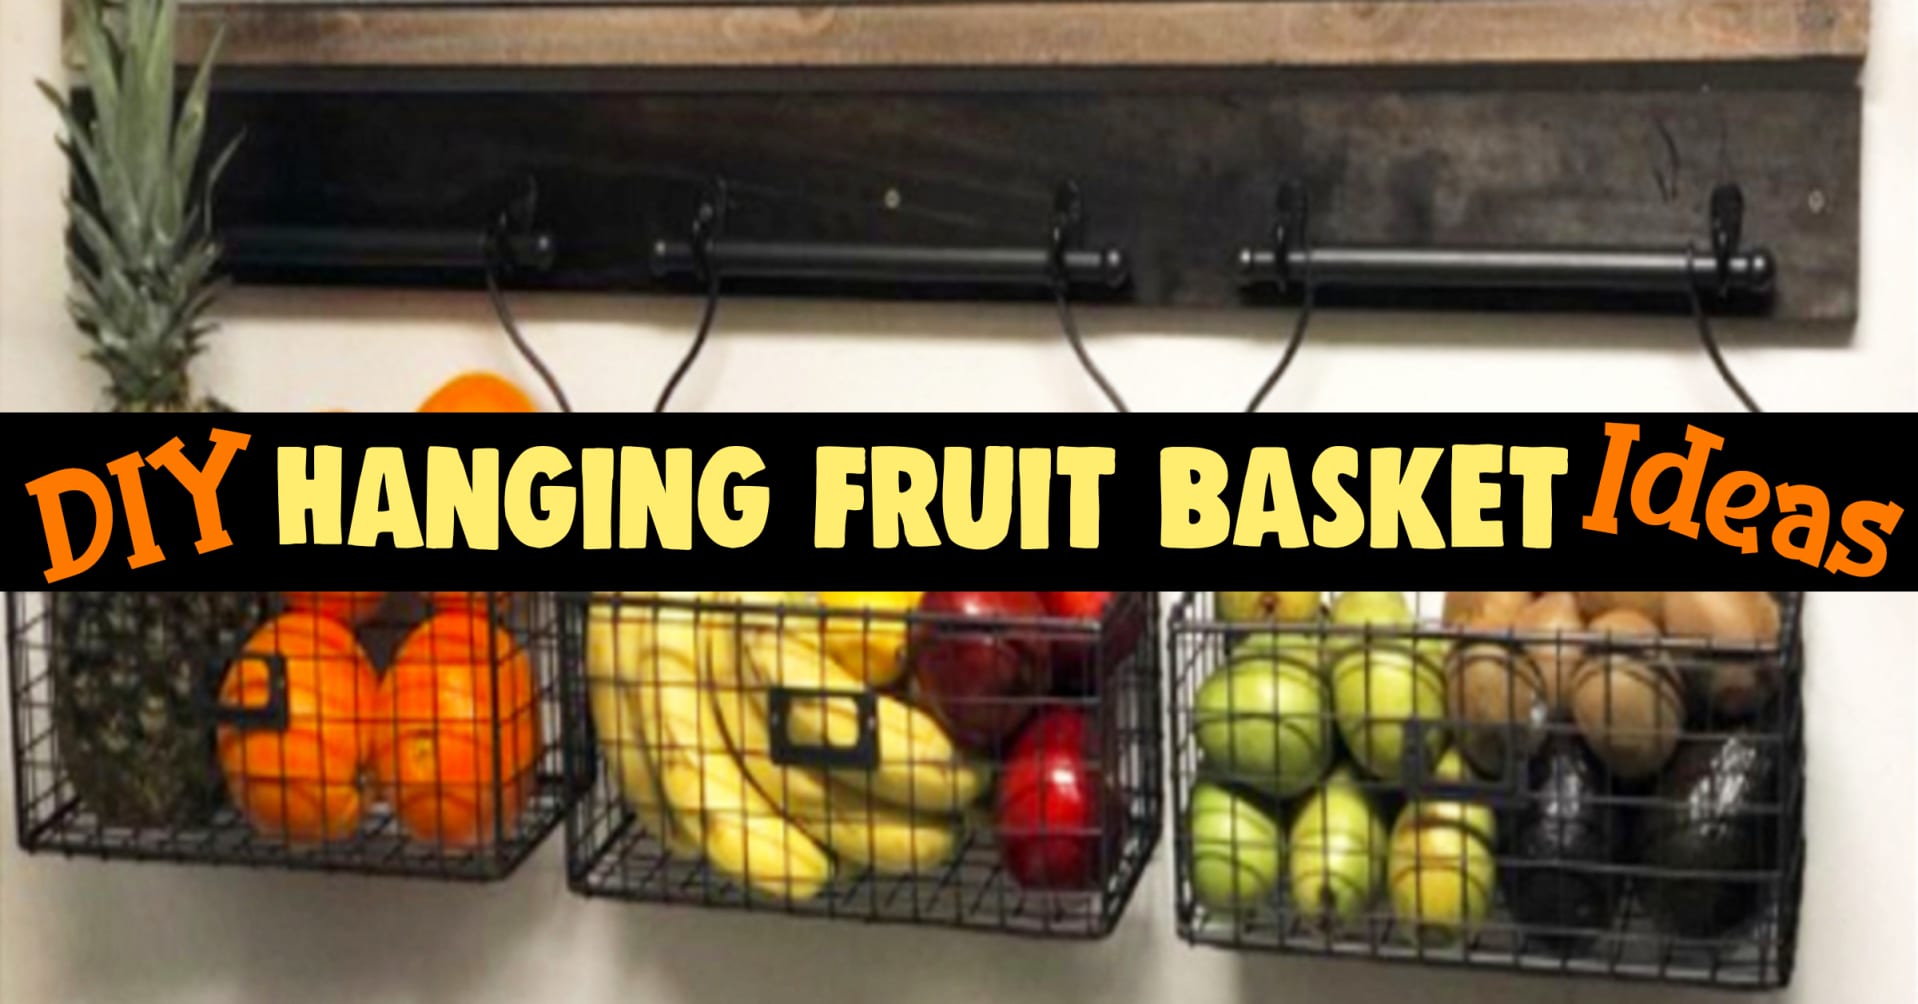 Hanging fruit basket ideas - DIY kitchen storage with hanging fruit baskets and wall0mounted produce baskets for all your fruits and vegetables - lovely farmhouse kitchen decorating ideas on a budget